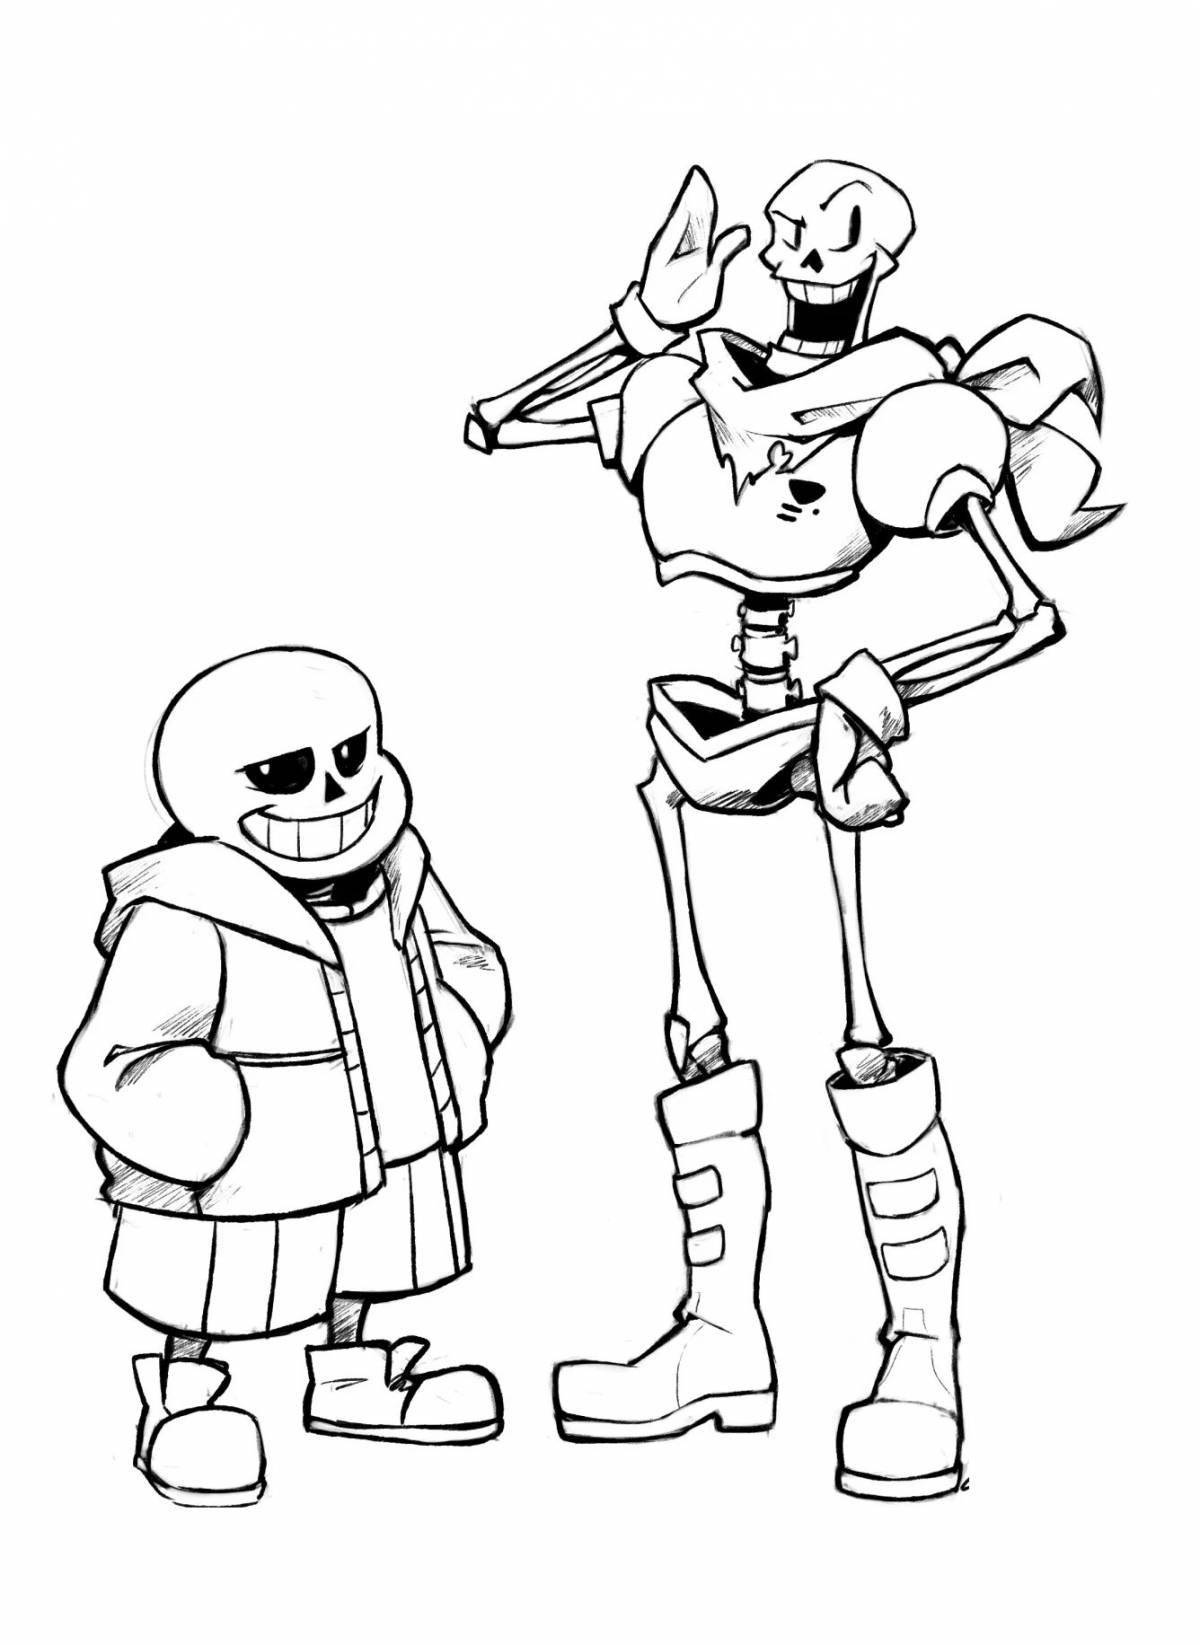 Glitter papyrus coloring page